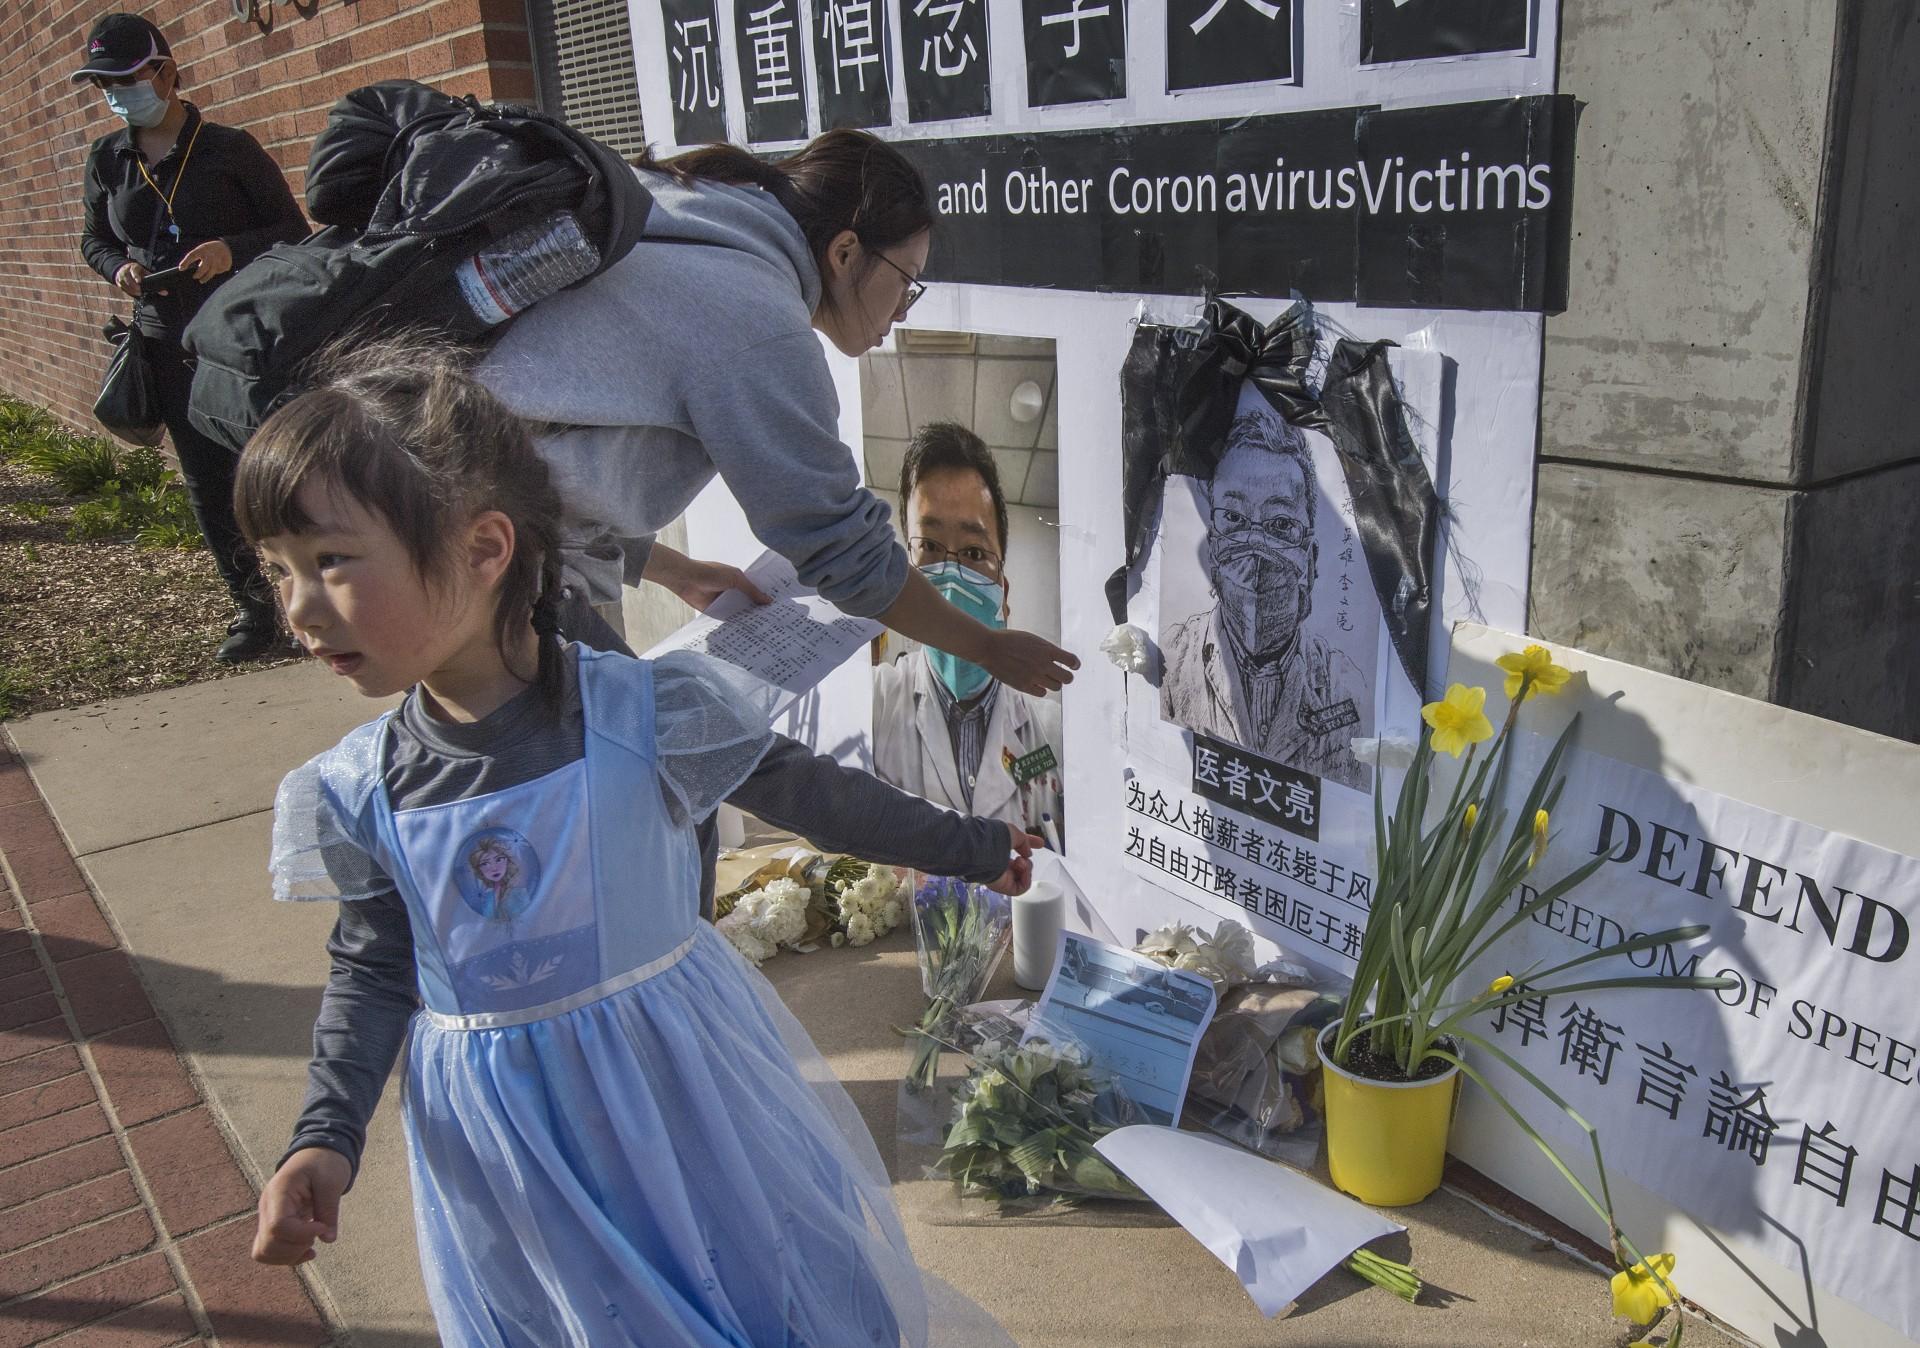 Chinese students and their supporters hold a memorial for Dr Li Wenliang, who was the whistleblower of Covid-19, that originated in Wuhan, China and caused the doctor's death in that city, outside the UCLA campus in Westwood, California, on Feb 15, 2020. Photo: AFP